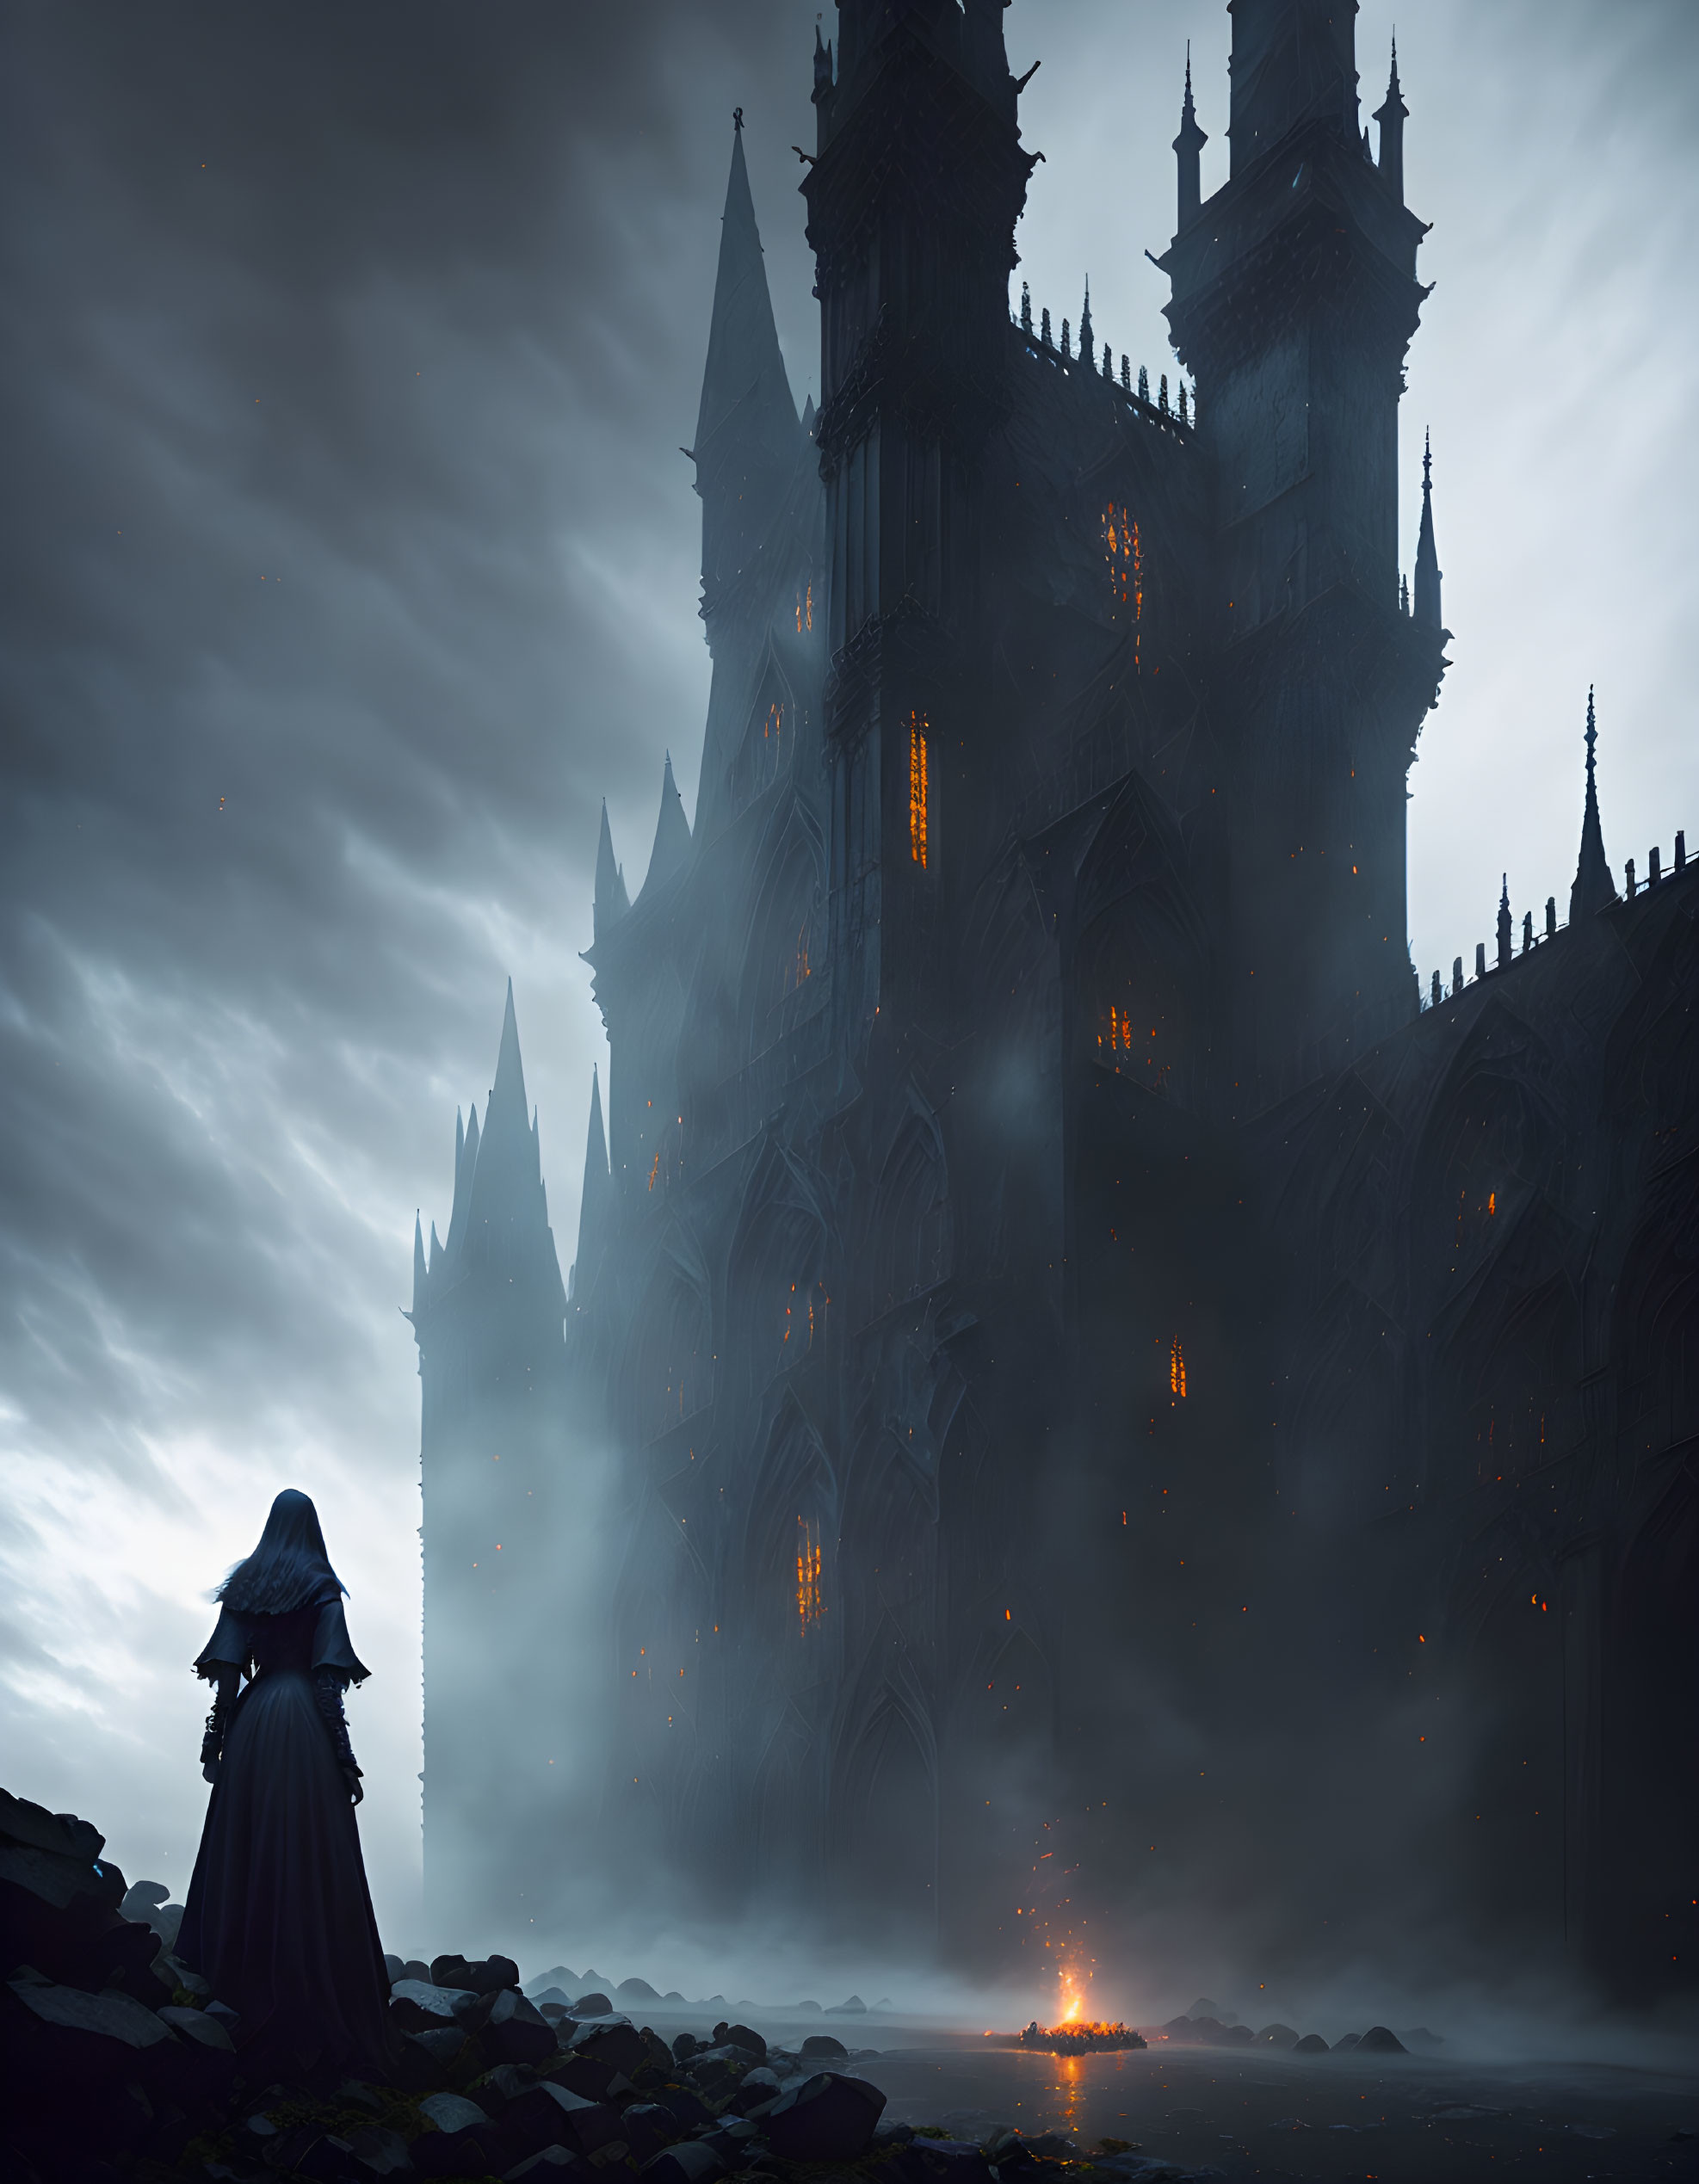 Gothic castle and figure